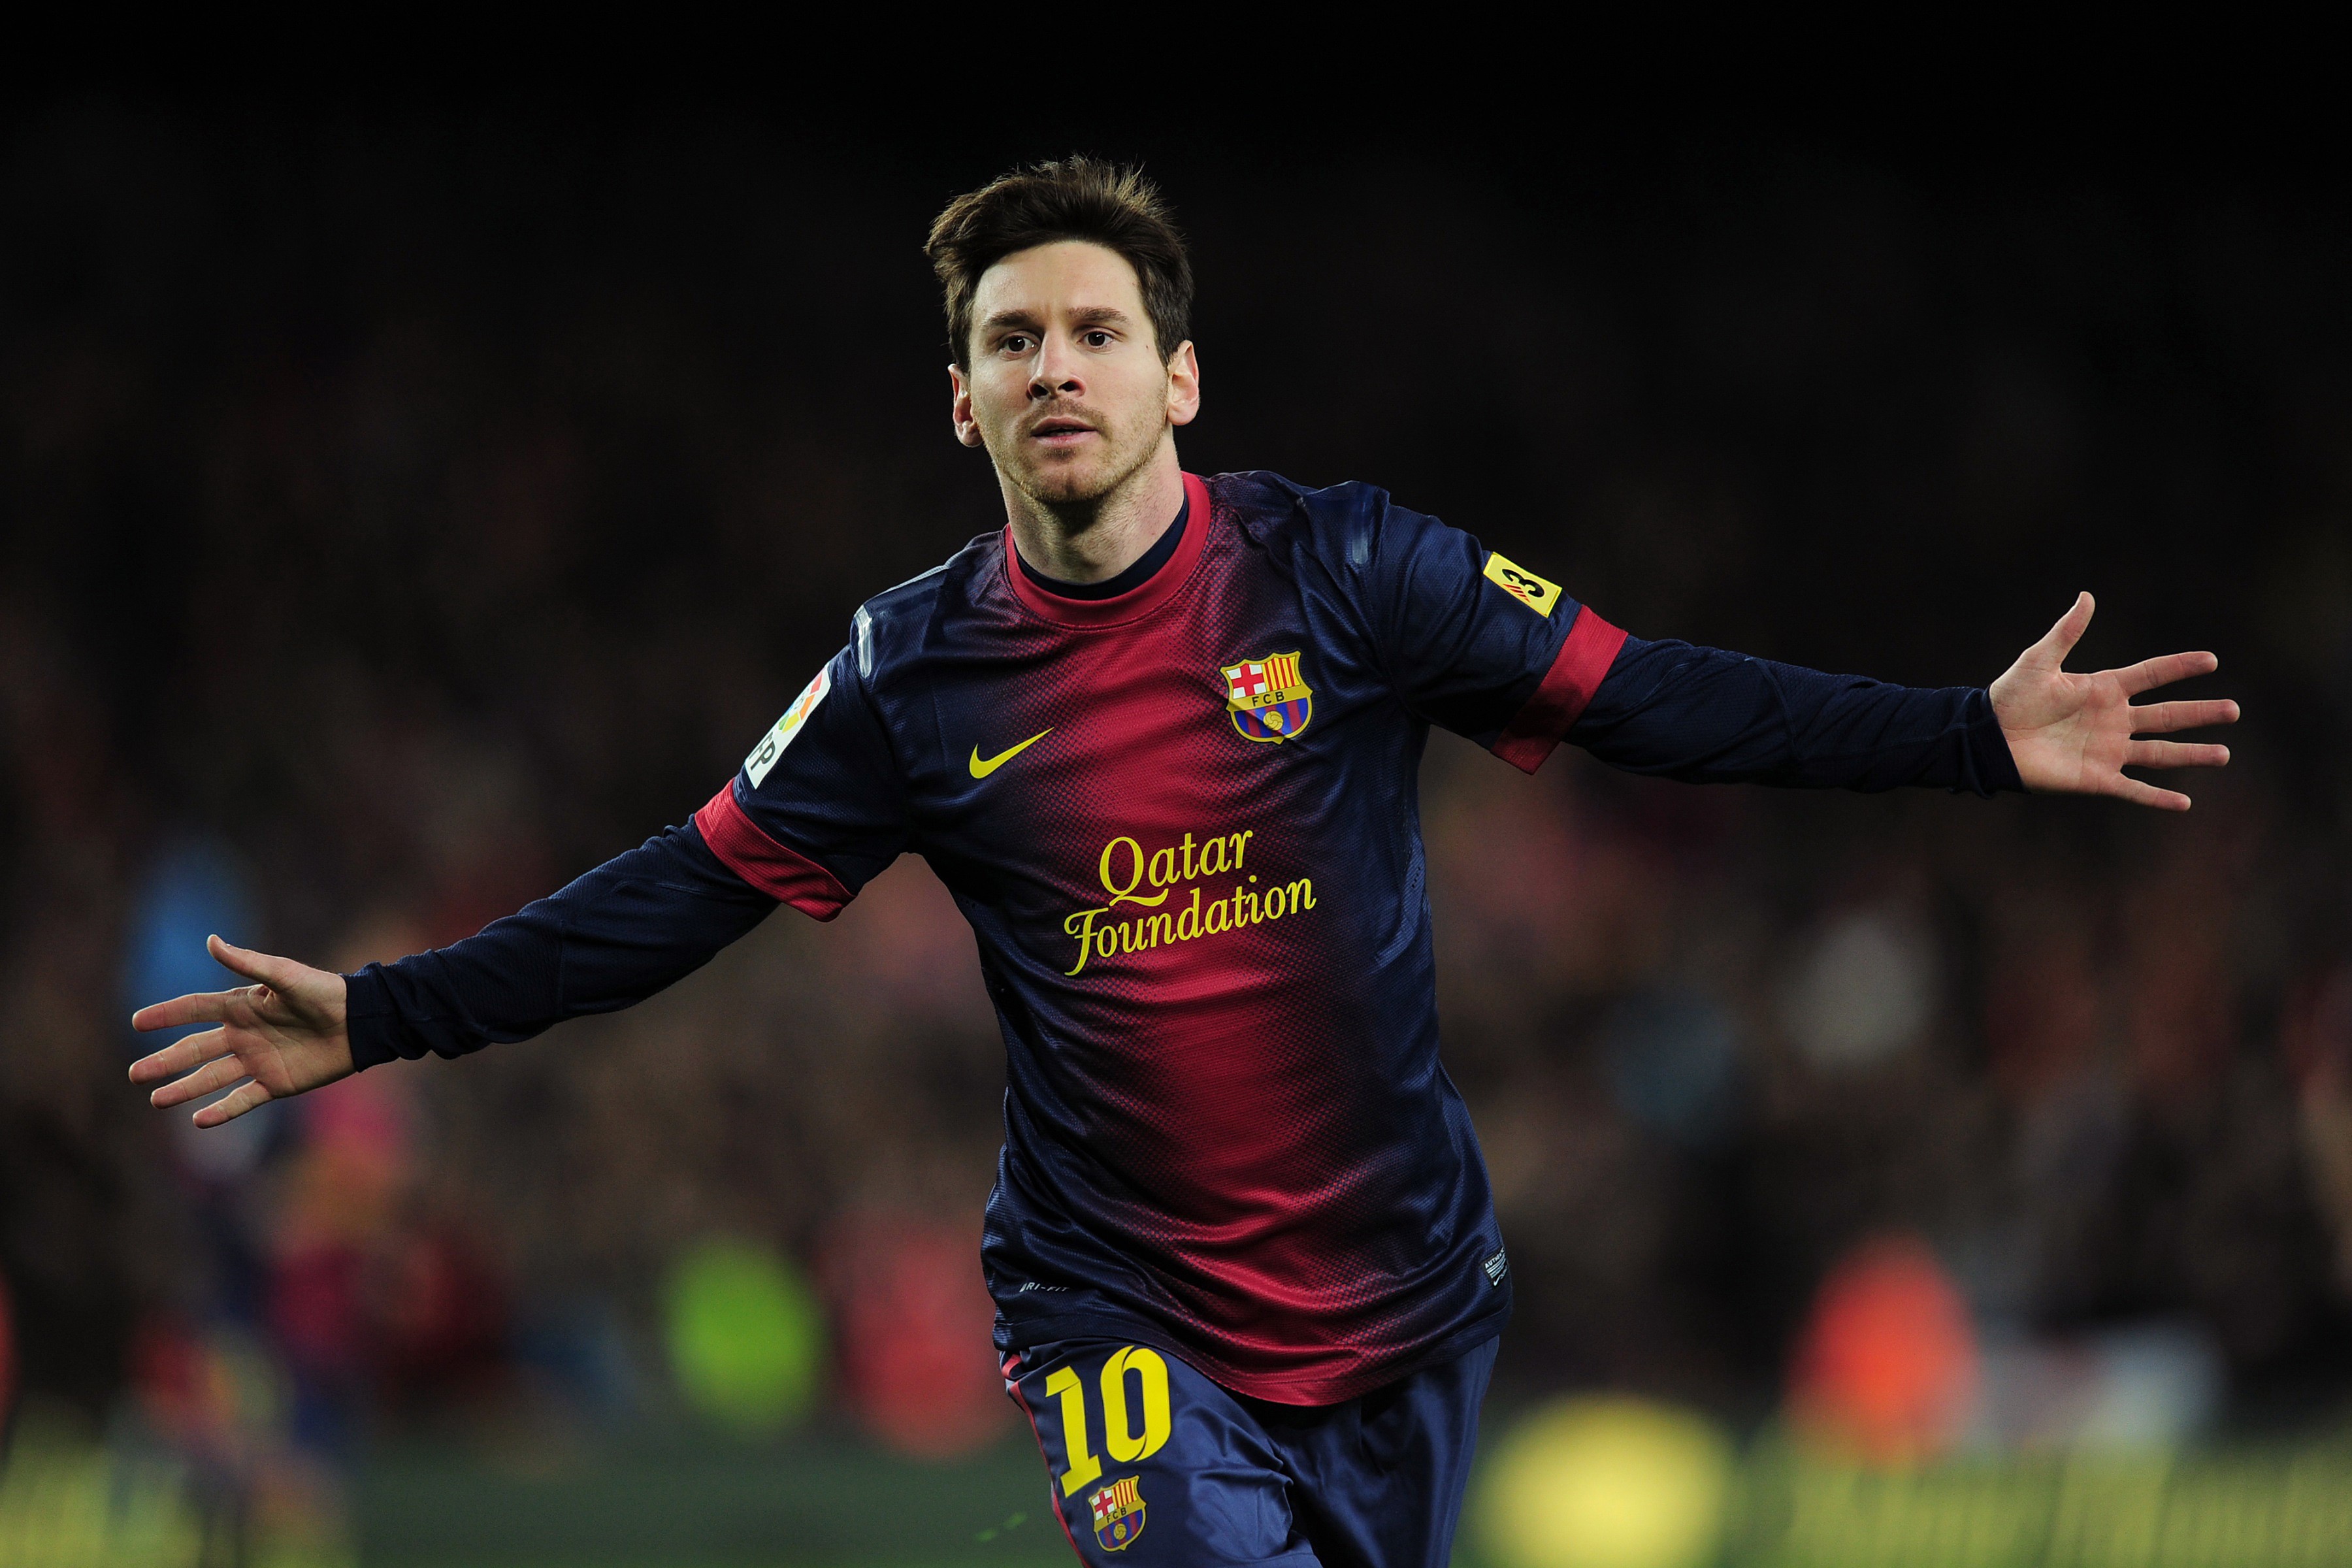 hd wallpaper of lionel messi after a goal 3600x2400